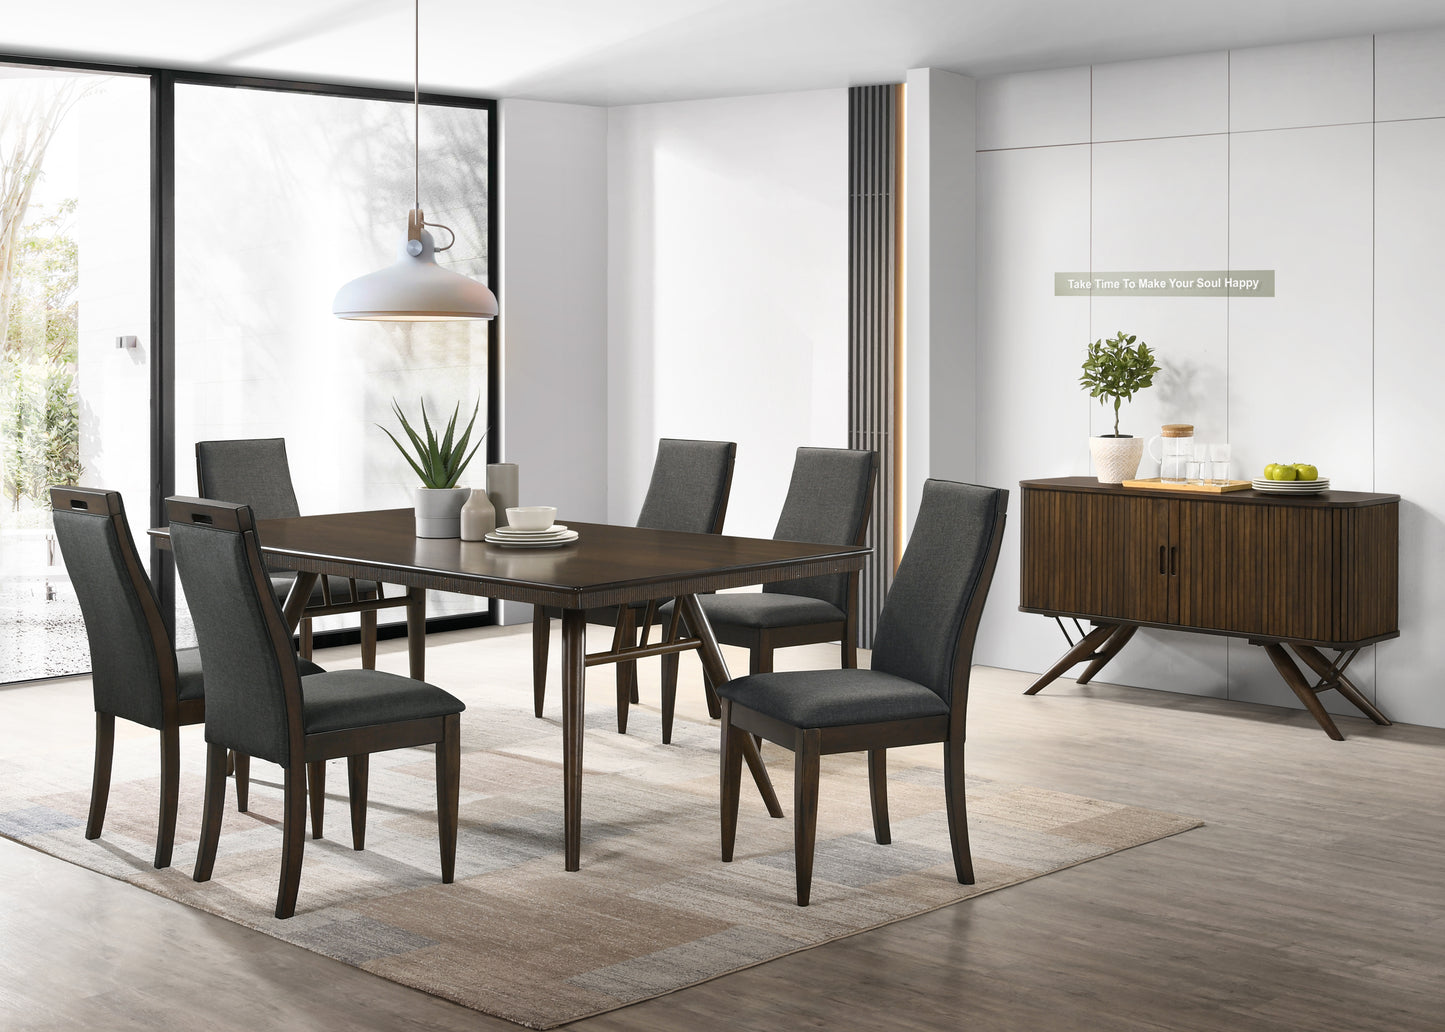 Coaster Furniture Wes Restro Inspired Dining Collection